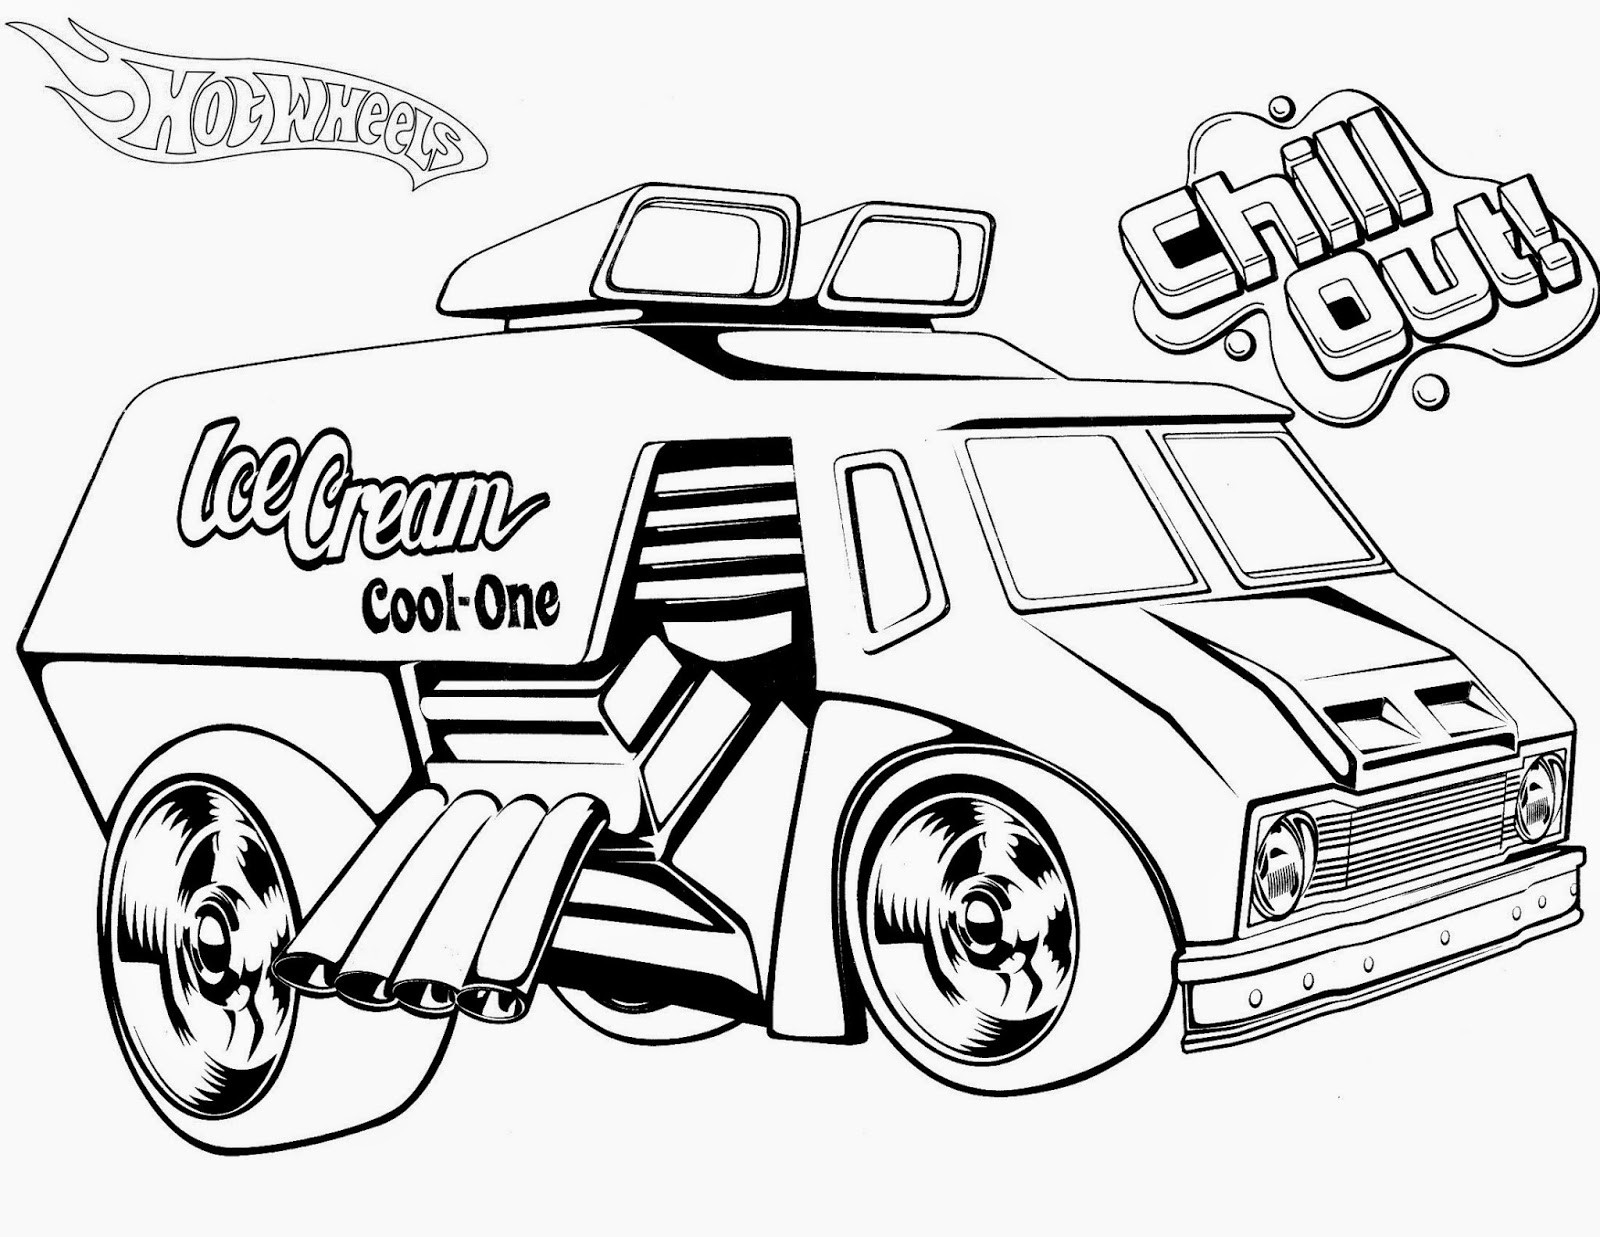 F1 Coloring Pages At Getcolorings | Free Printable With Blank Race Car Templates